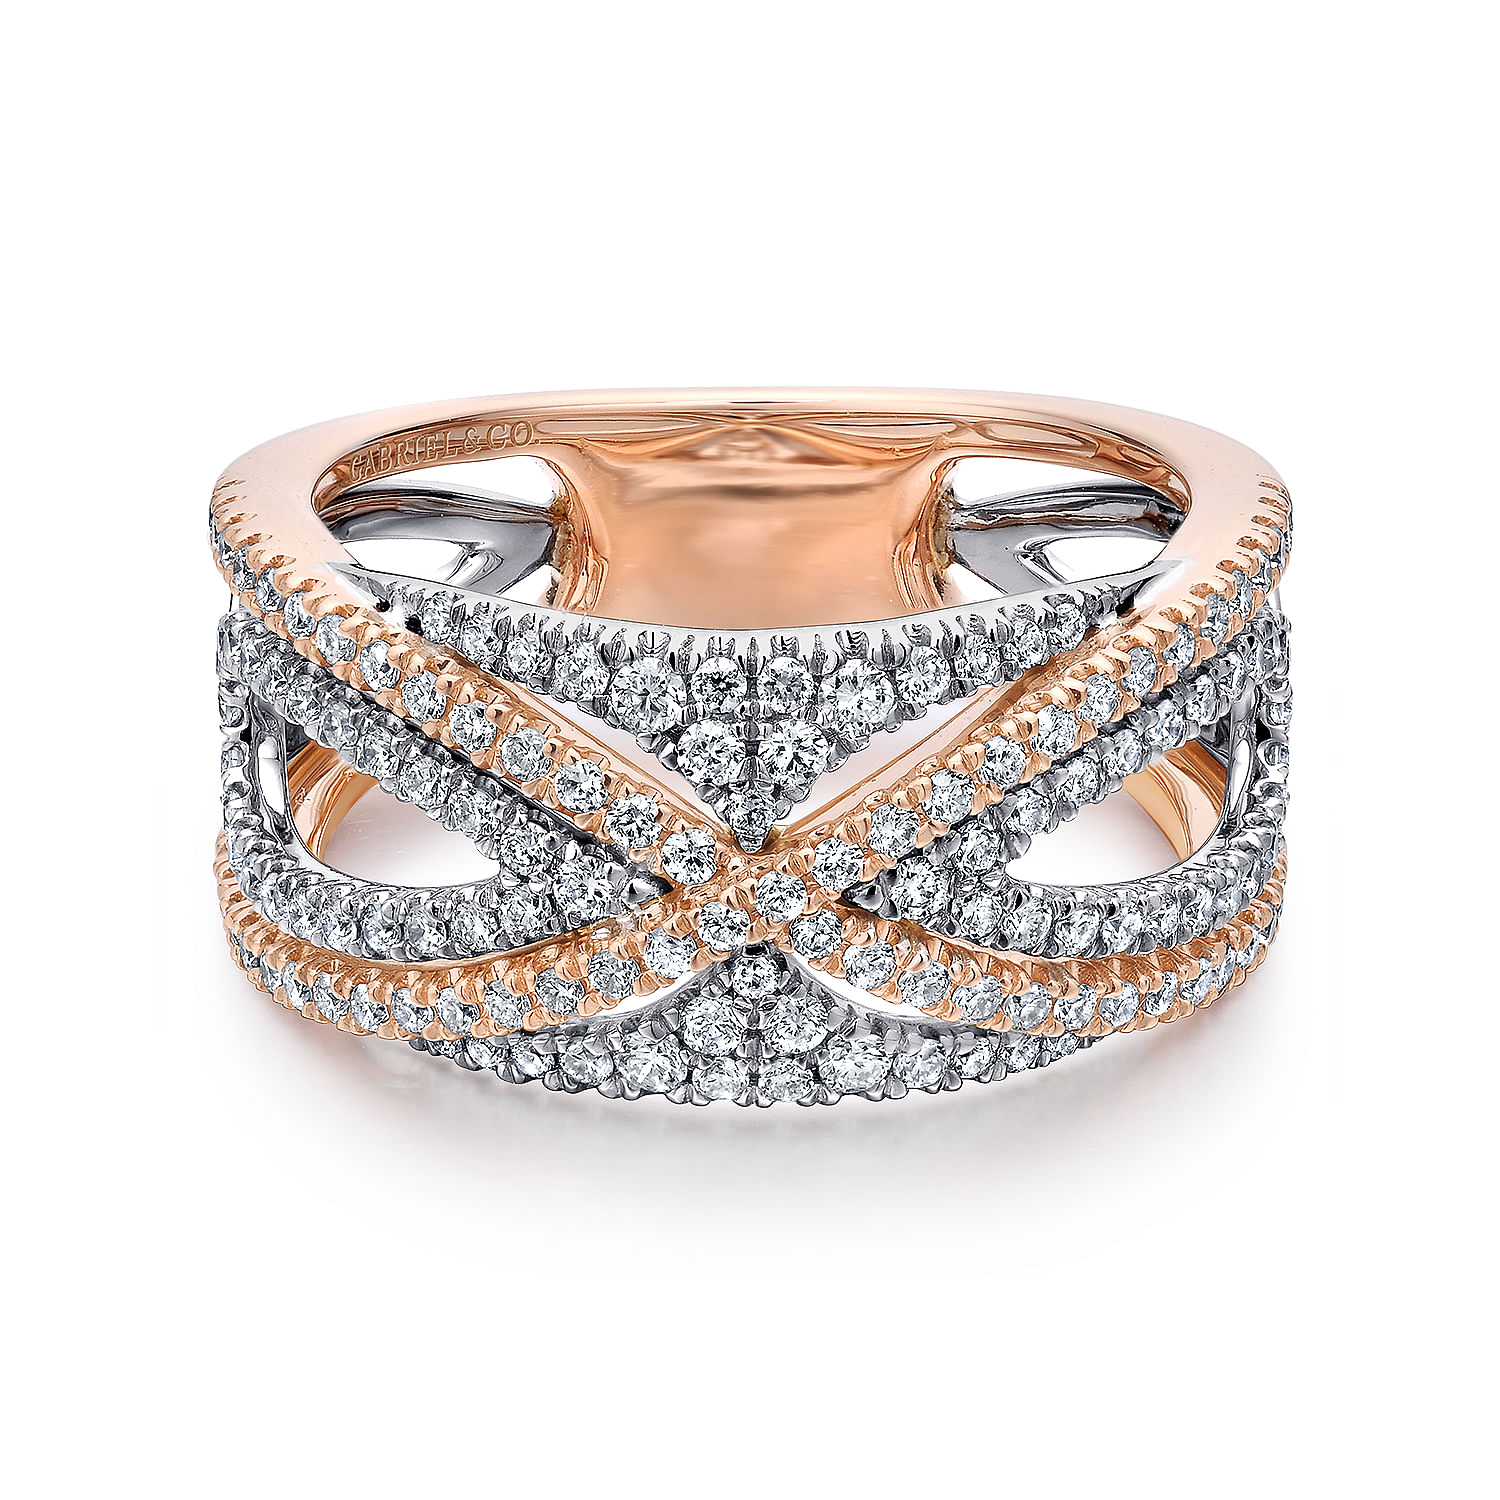 Wide 14K White and Rose Gold French Pave Set Diamond Anniversary Band